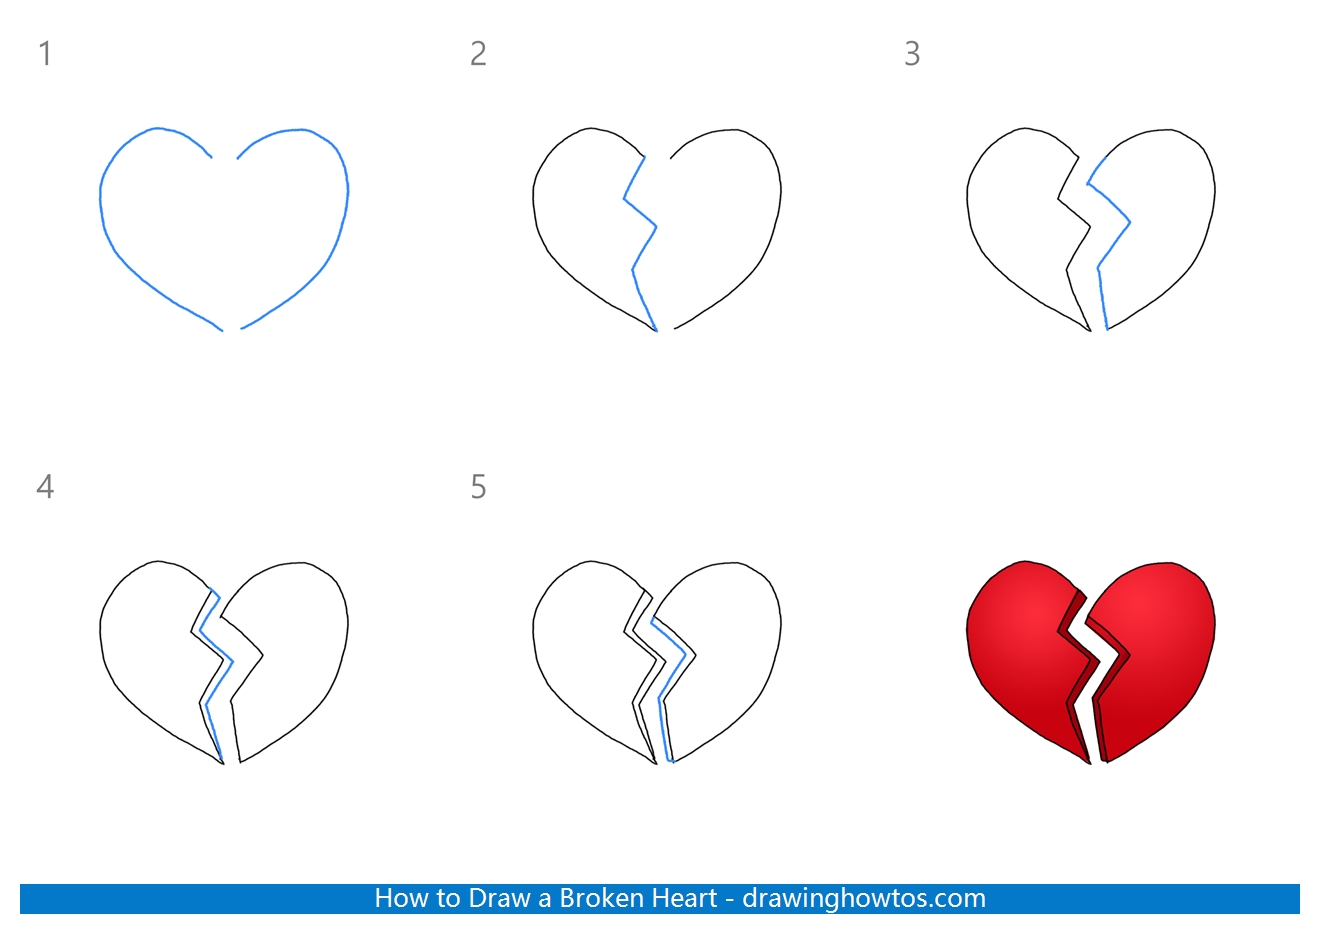 How to Draw a Broken Heart Step by Step